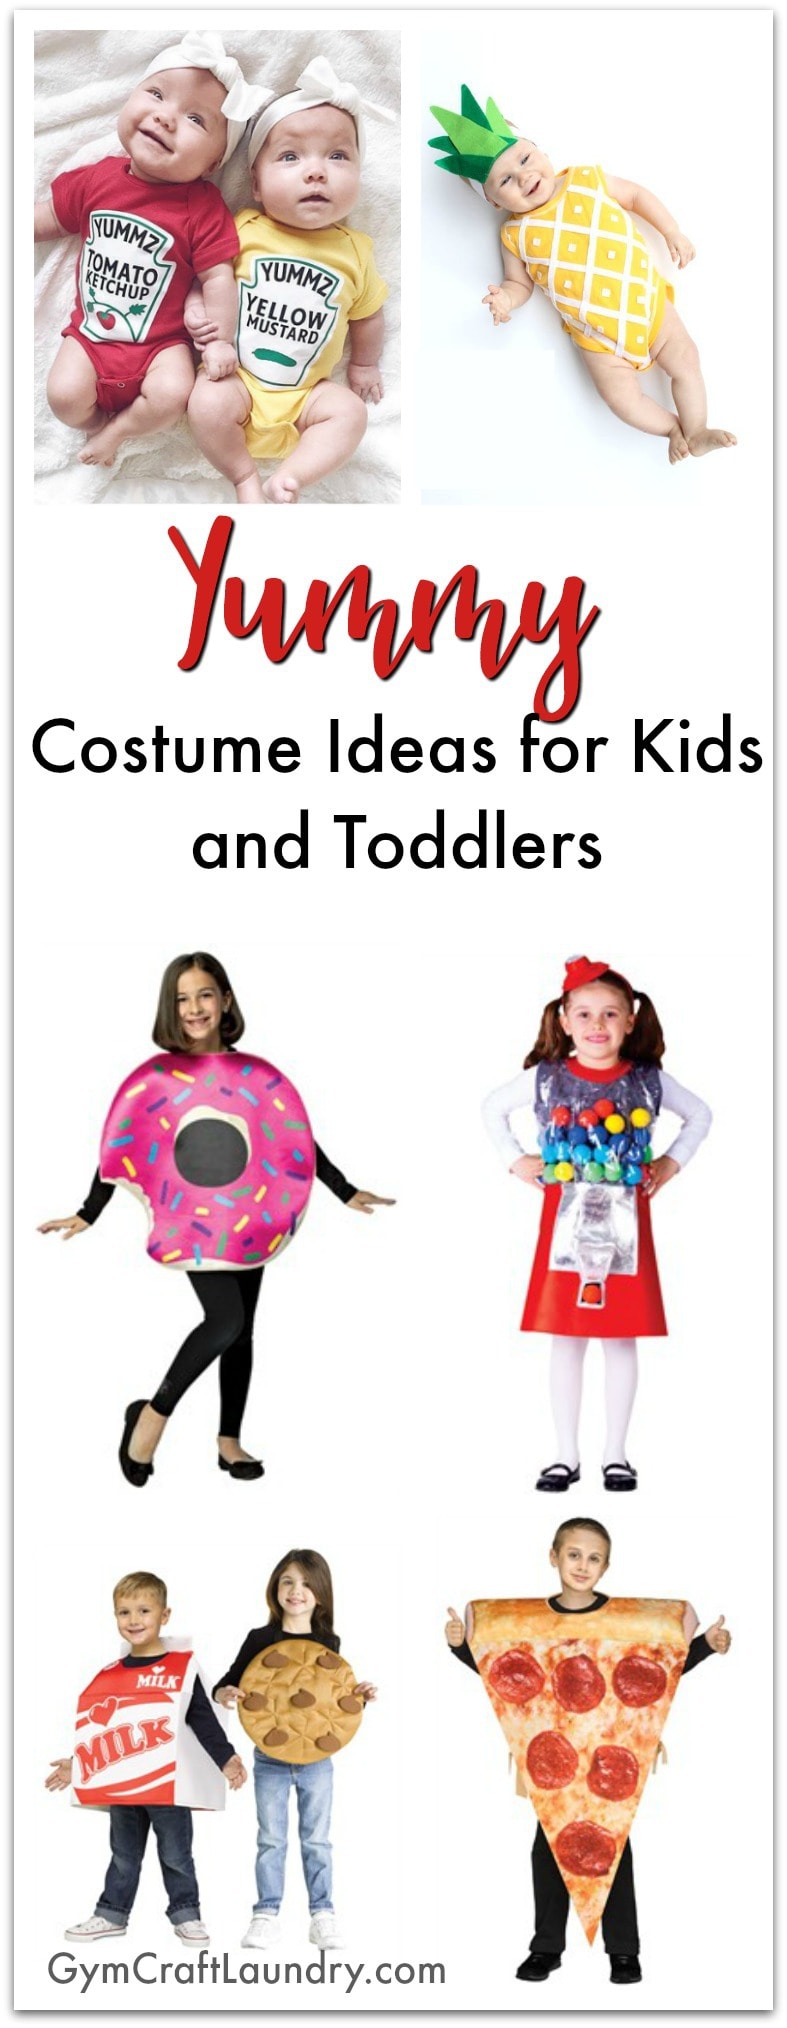 Yummy Halloween Costume Ideas for Kids and Toddler based on Food